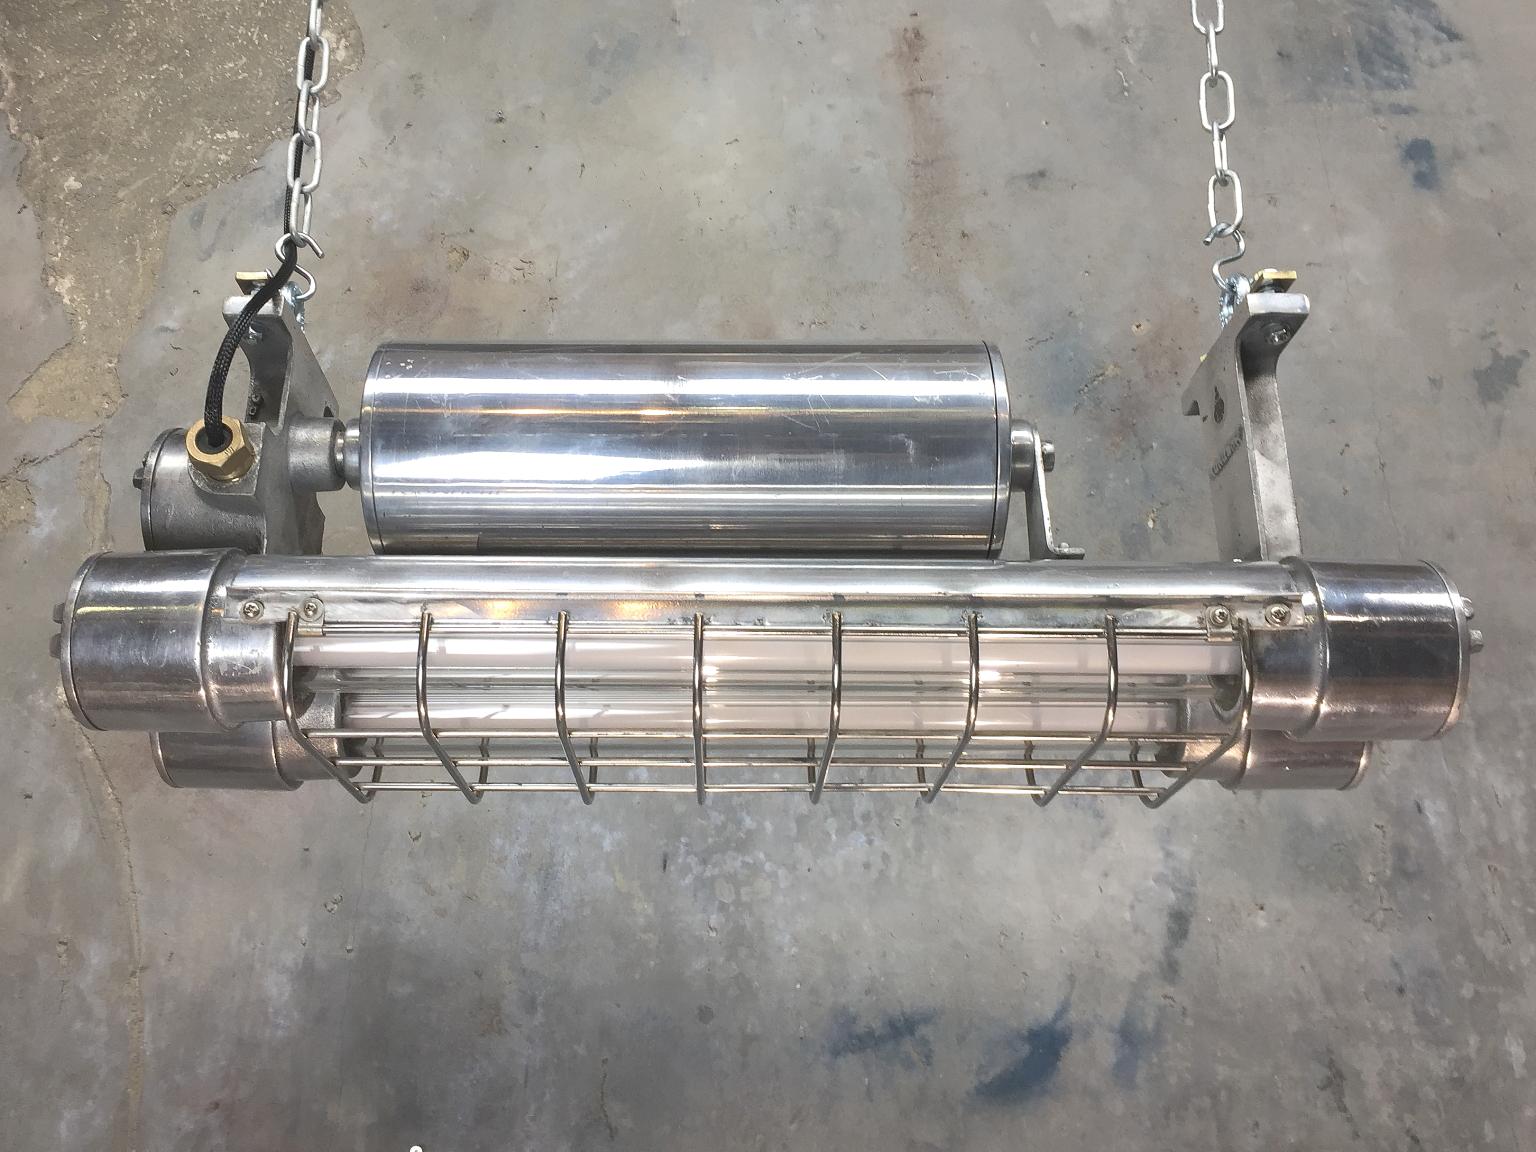 Late 20th Century Japanese Aluminum Flameproof Strip Light, Brass Fittings and Chrome Cage For Sale